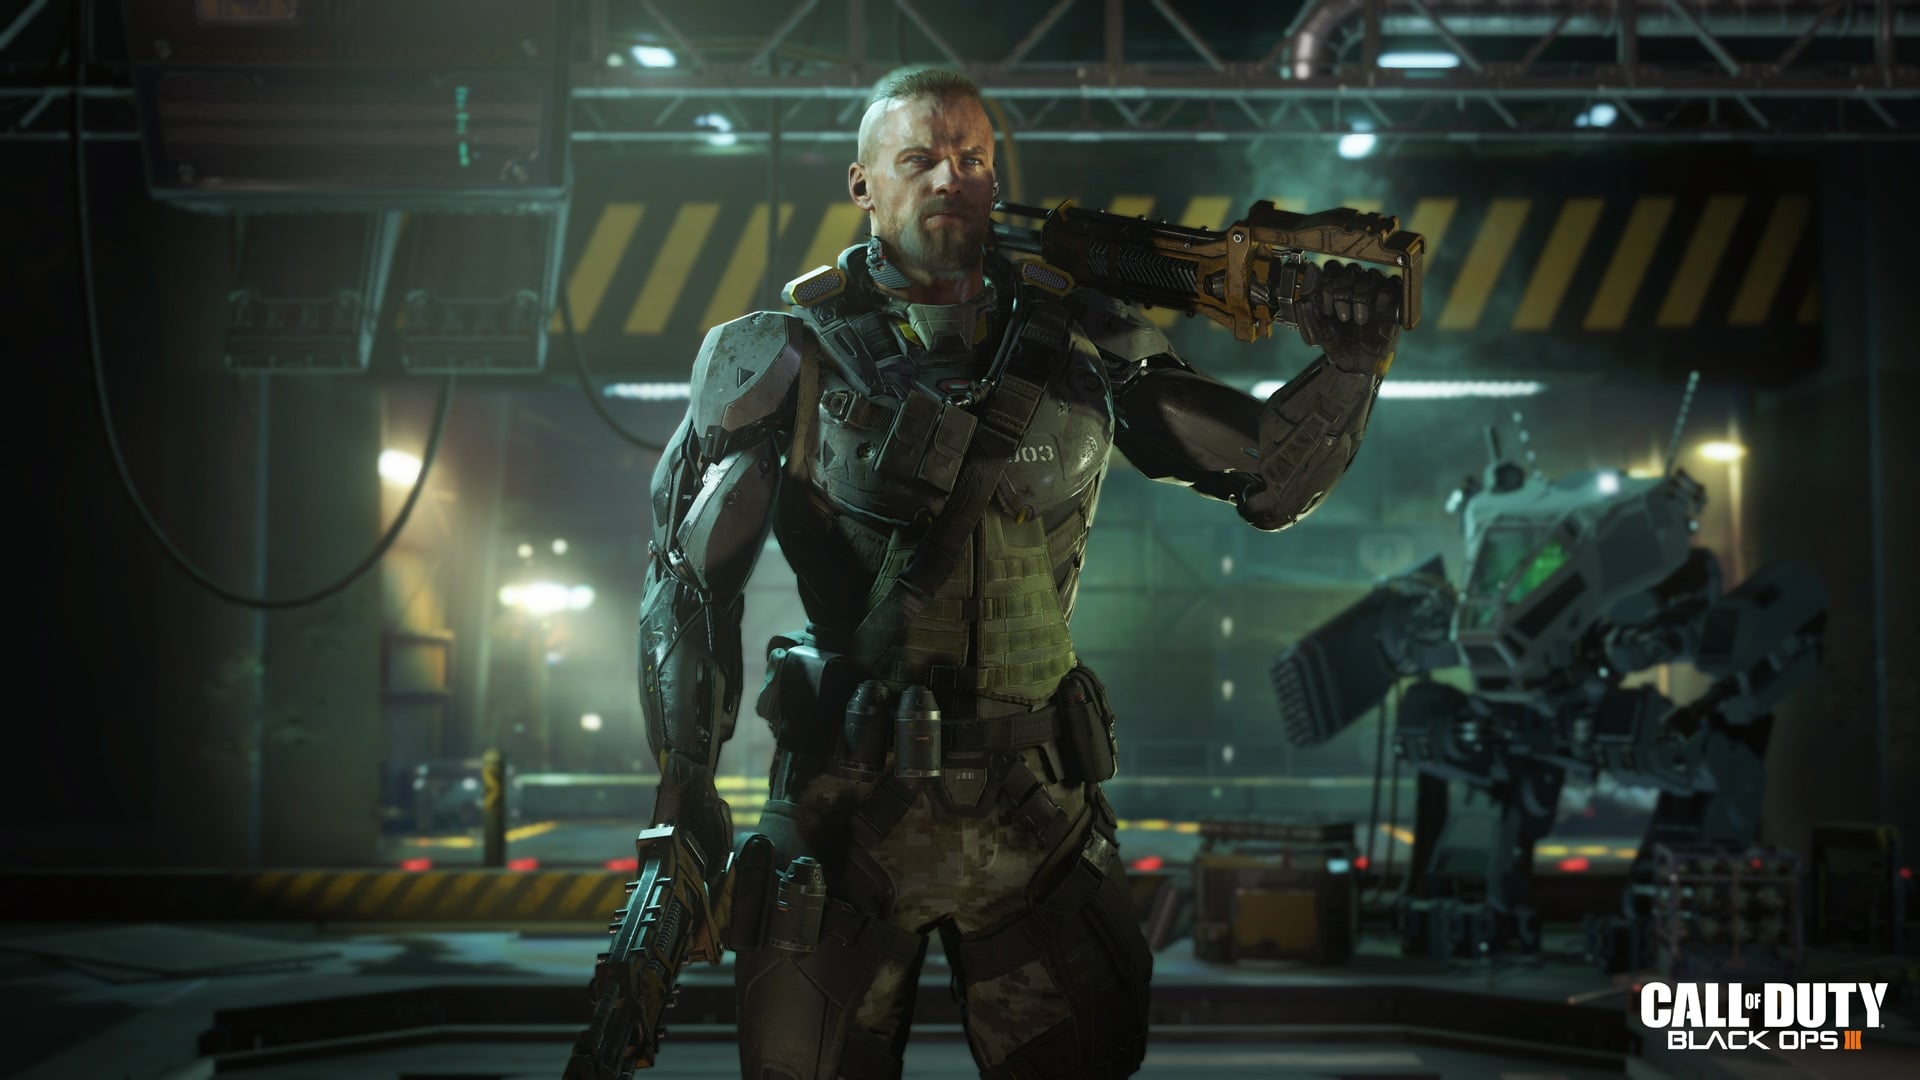 Download Call of Duty: Black Ops III Install Latest App downloader